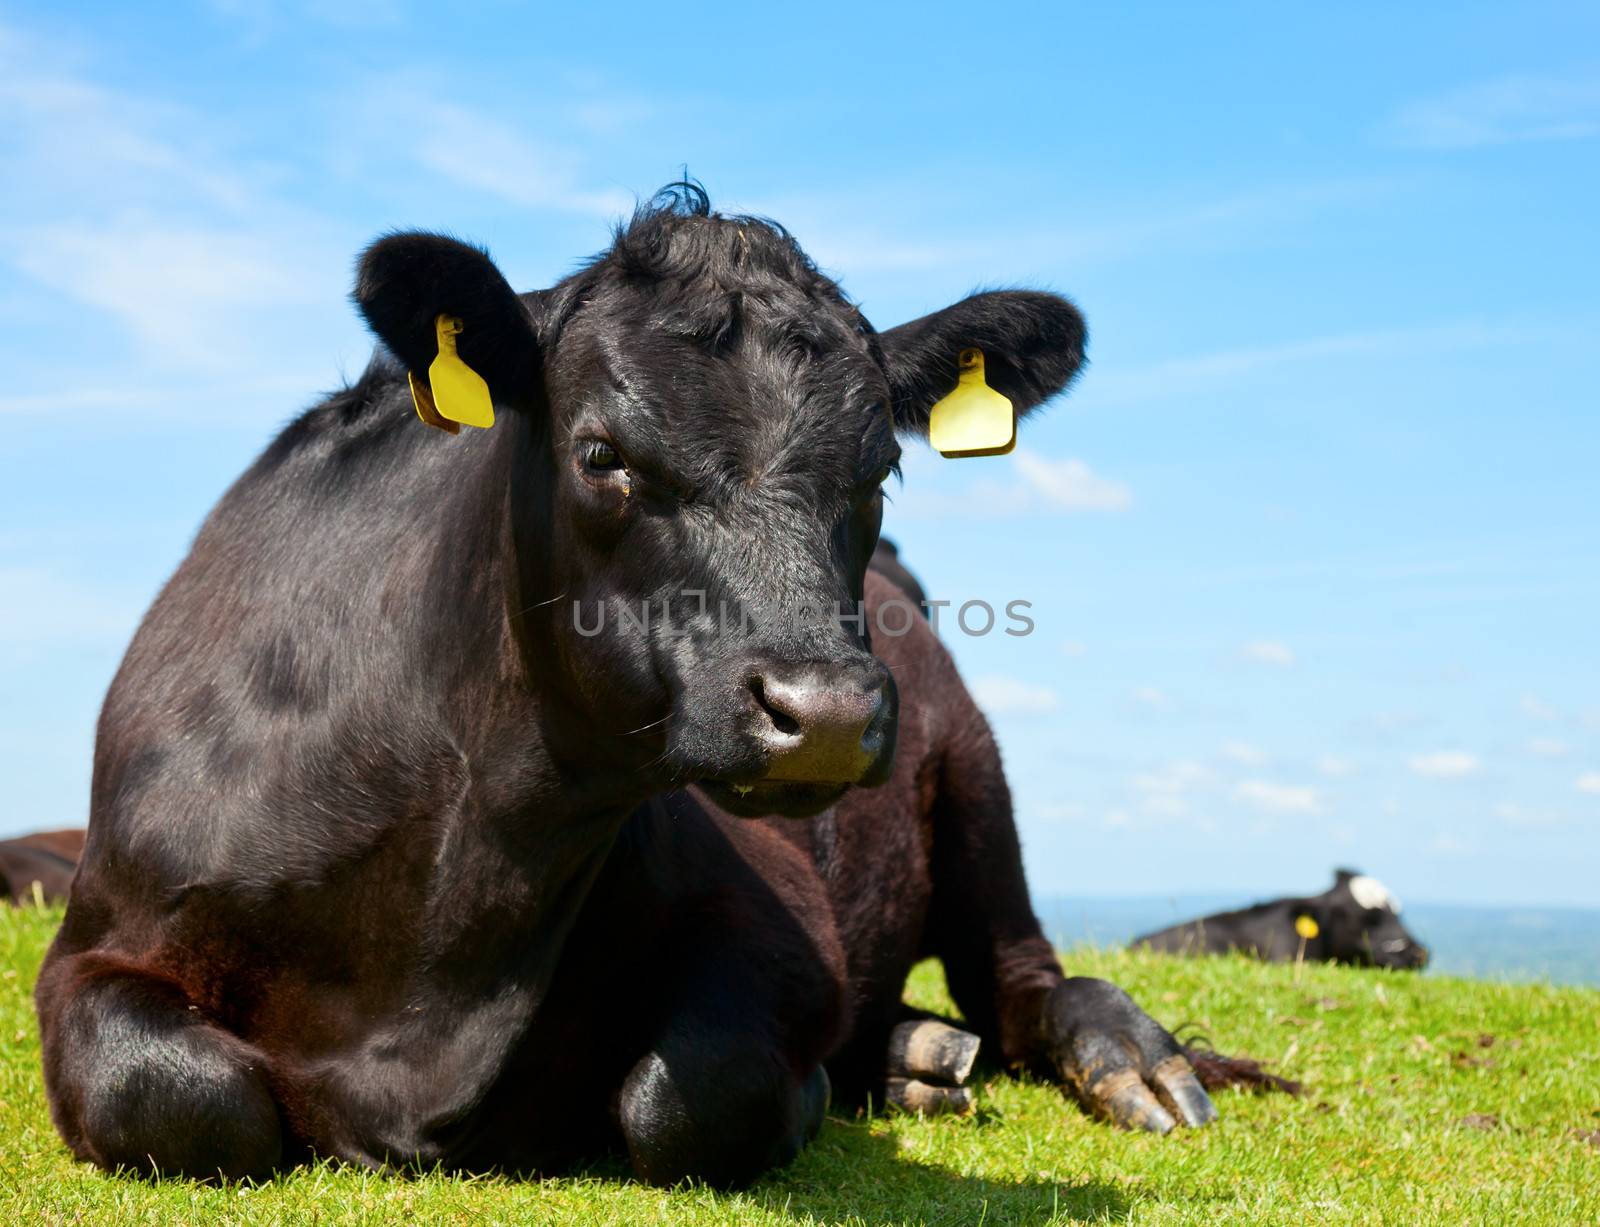 Black Aberdeen Angus cow at pasture in England